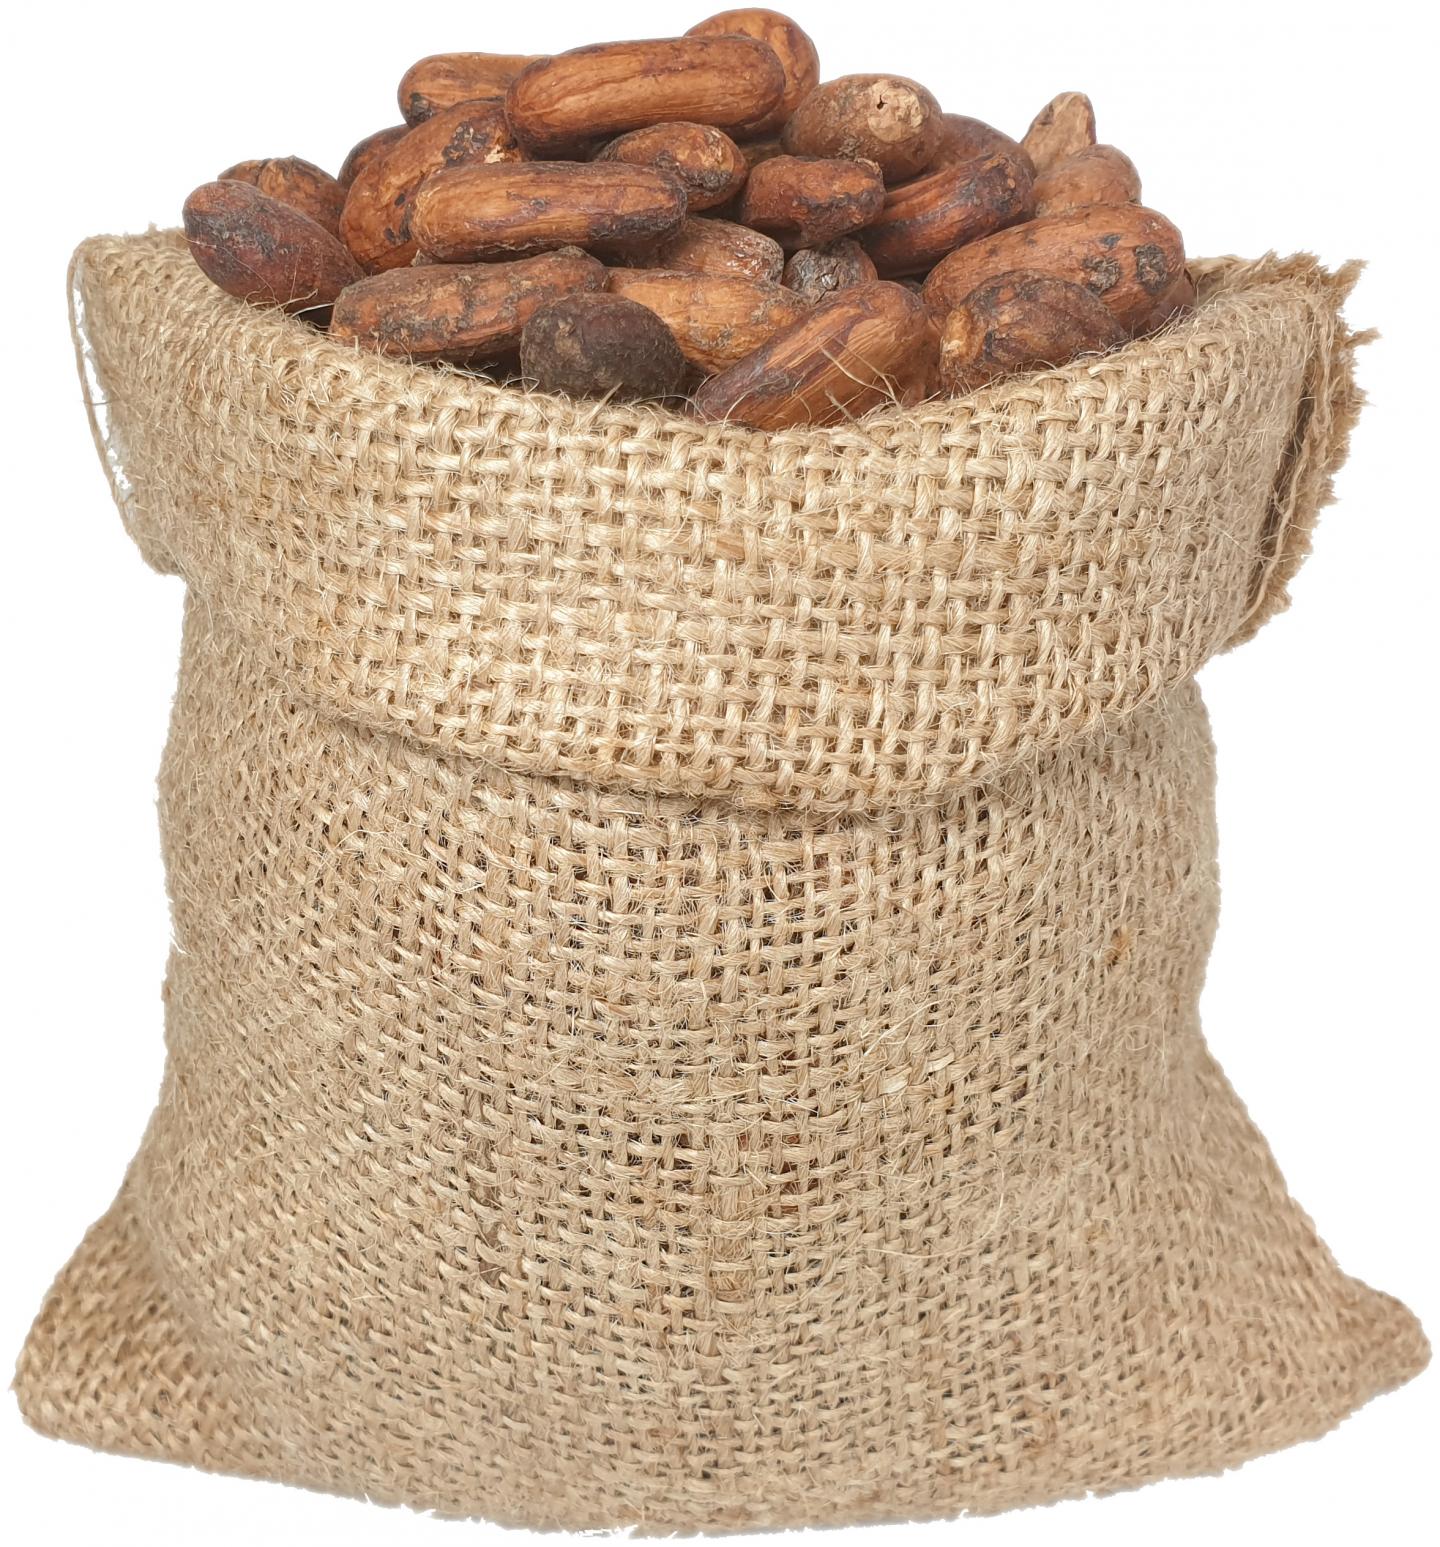 Bag with cocoa beans